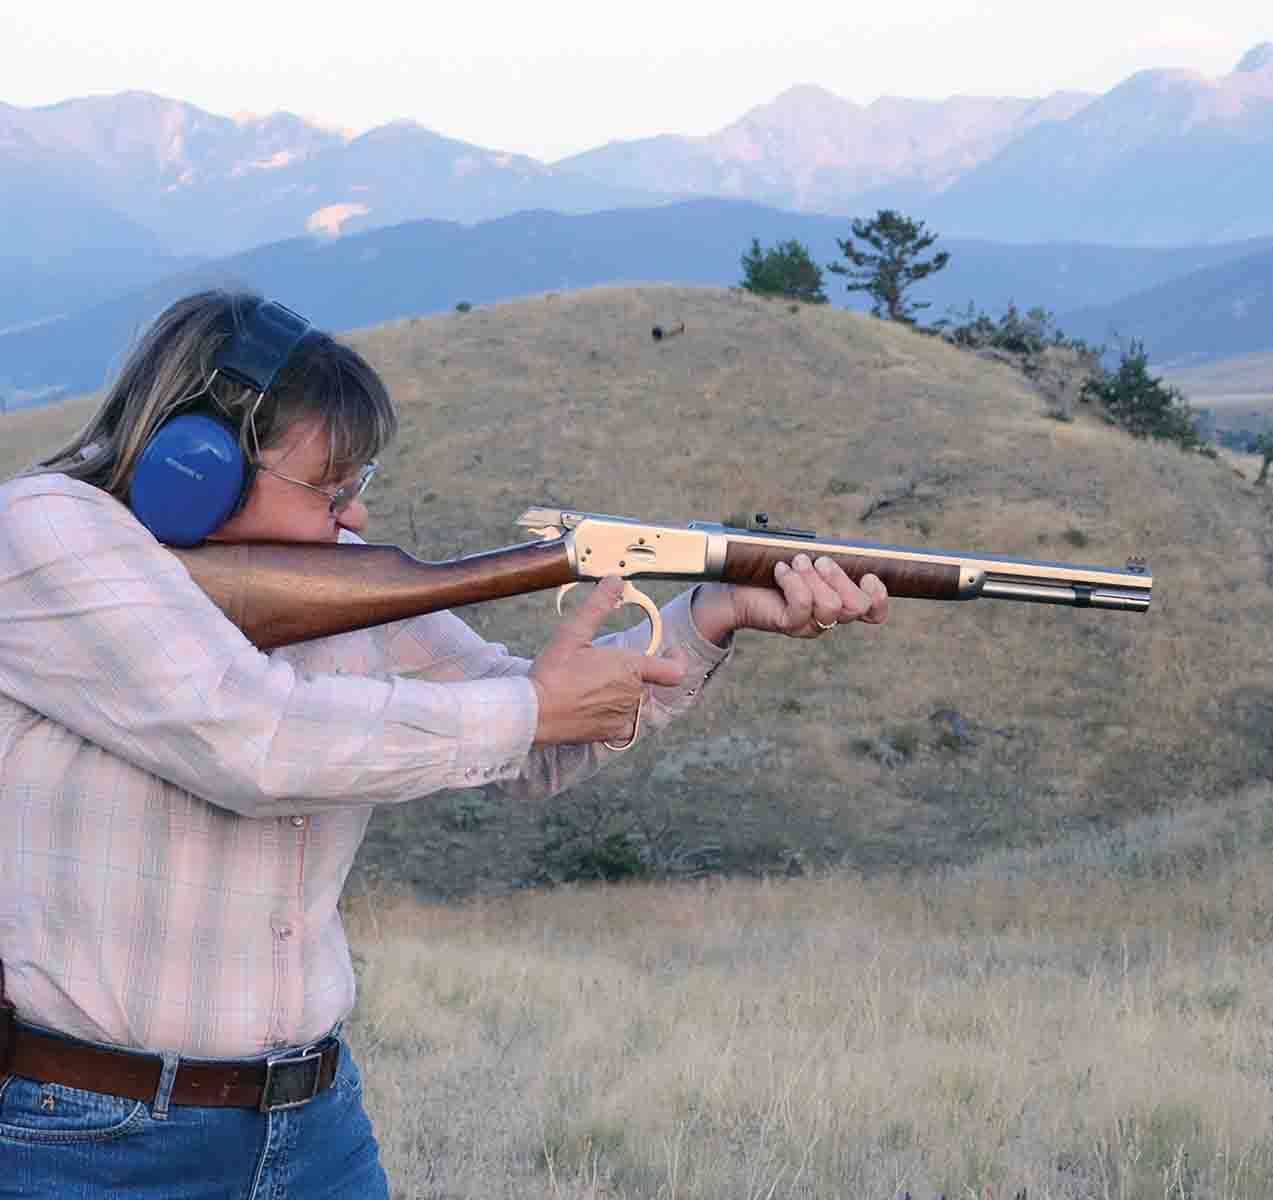 After years of cowboy action competition, Yvonne learned to operate a lever-action rifle with it shouldered.